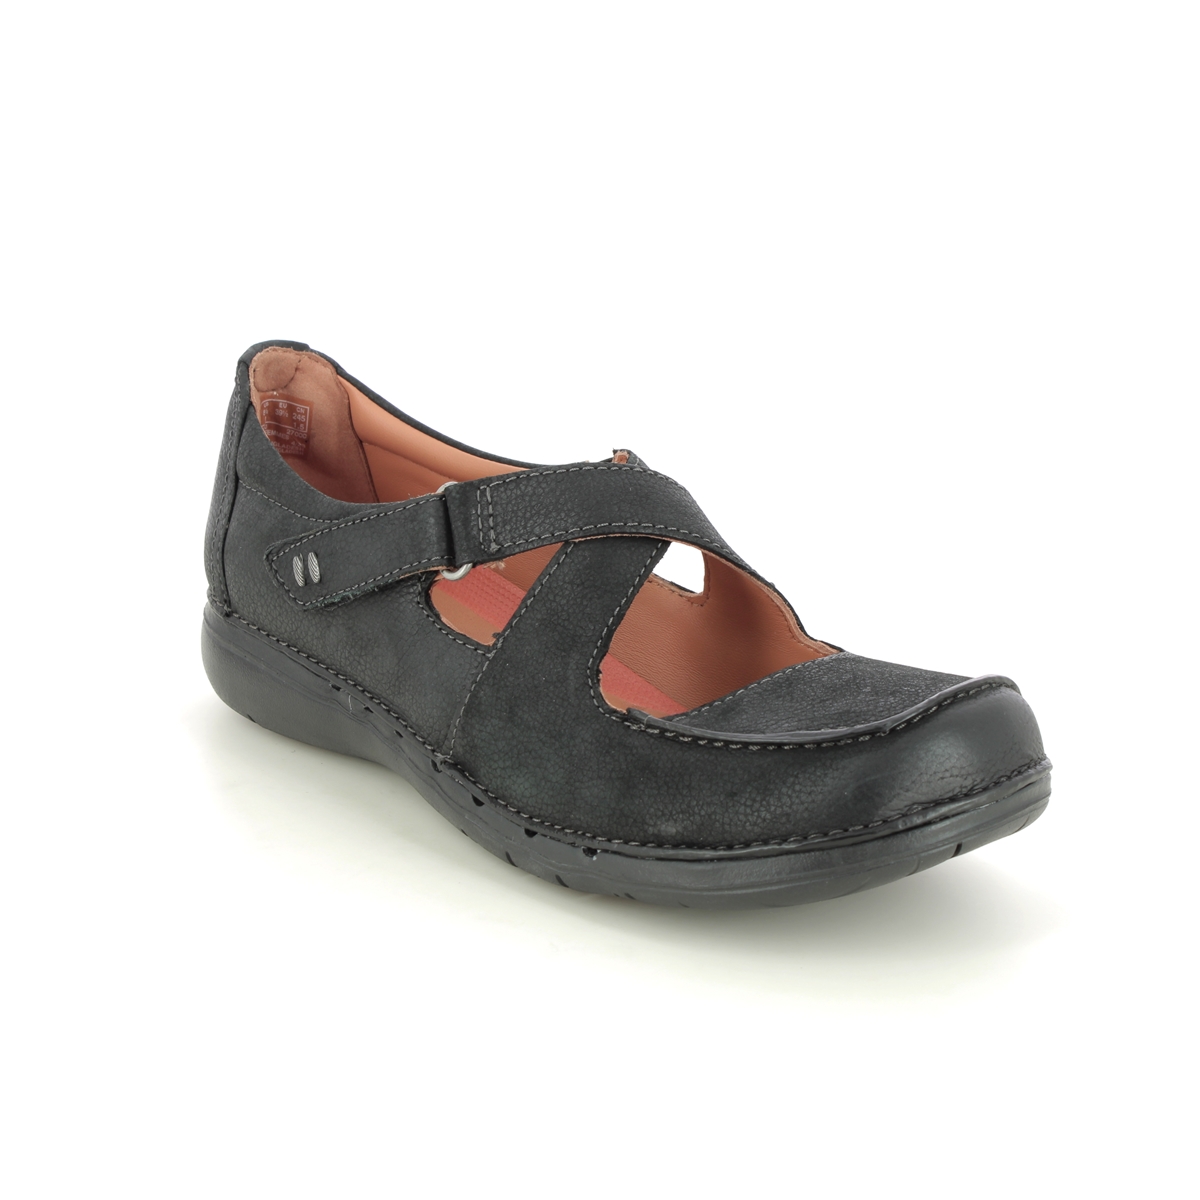 Clarks Un Loop Strap Black Leather Womens Mary Jane Shoes 749704D In Size 4.5 In Plain Black Leather